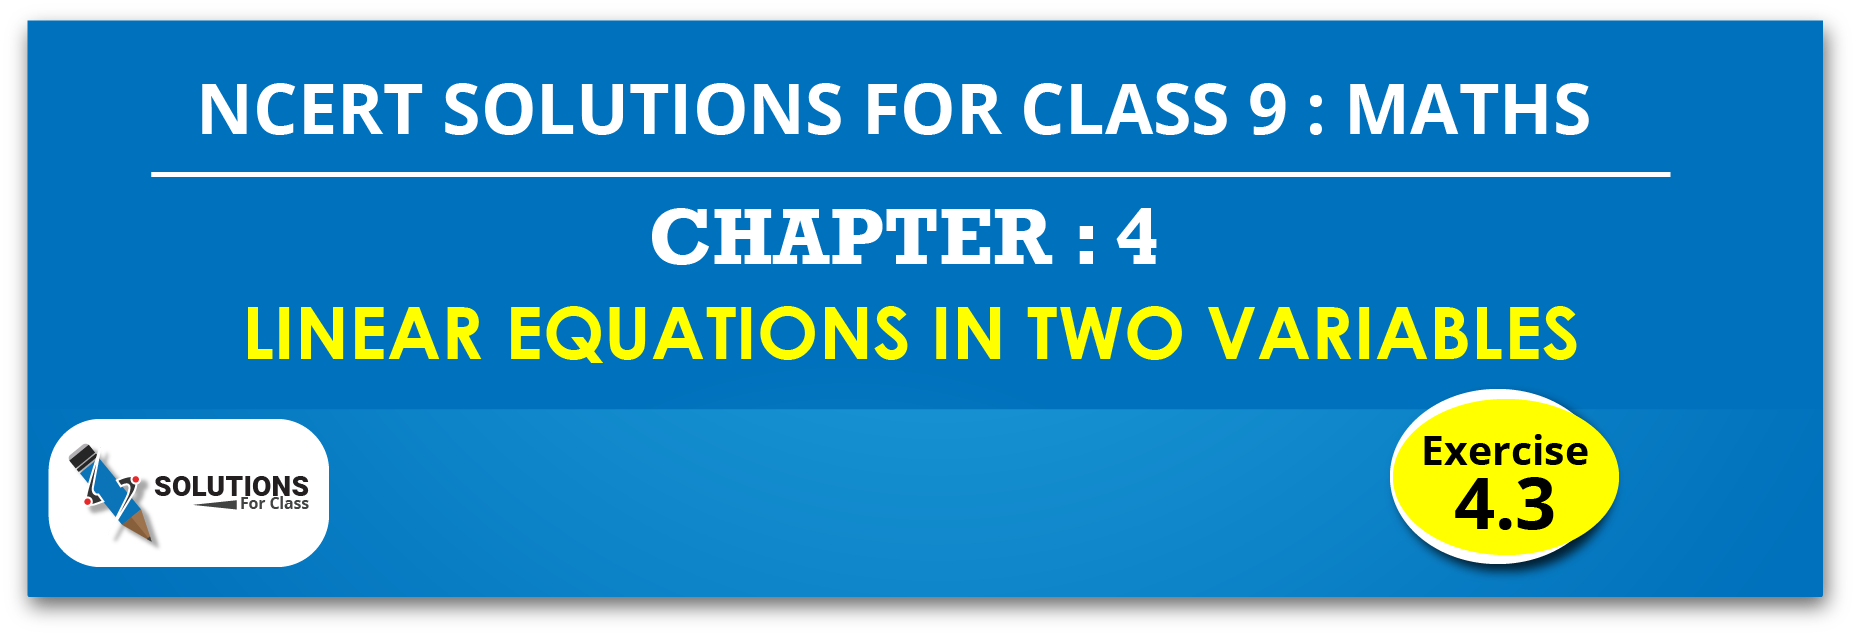 NCERT Solution For Class 9, Maths, Chapter 4, Linear Equations In Two Variables, Exercise 4.3